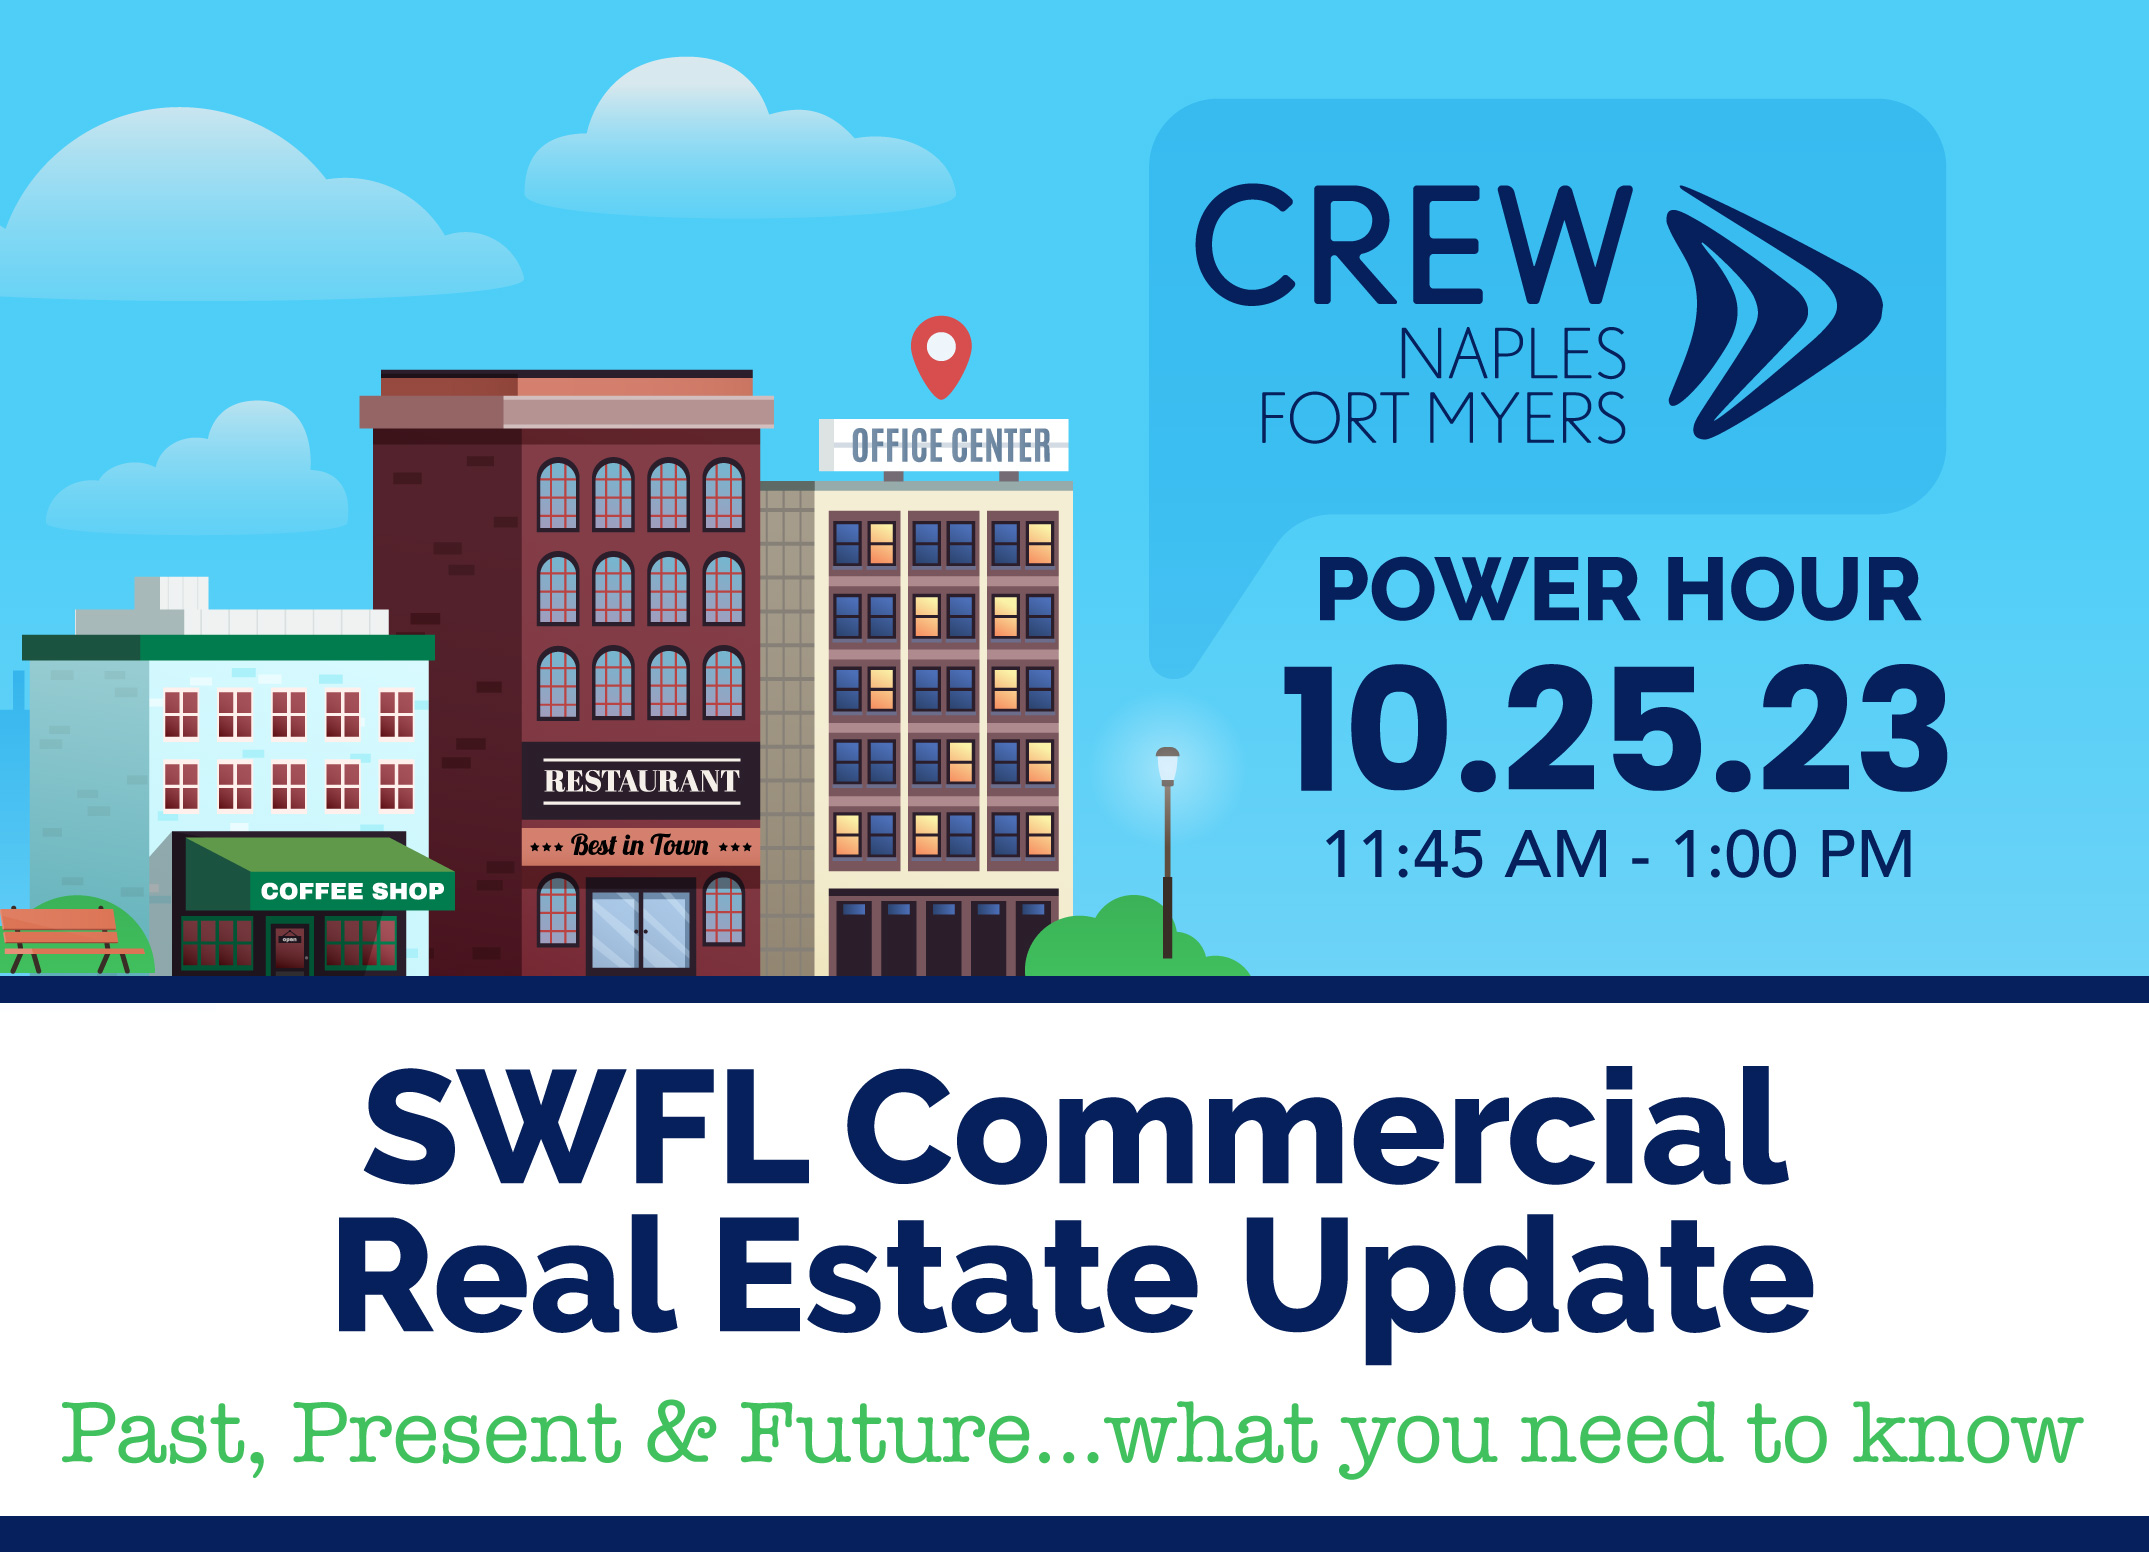 SWFL Commercial Real Estate Updates